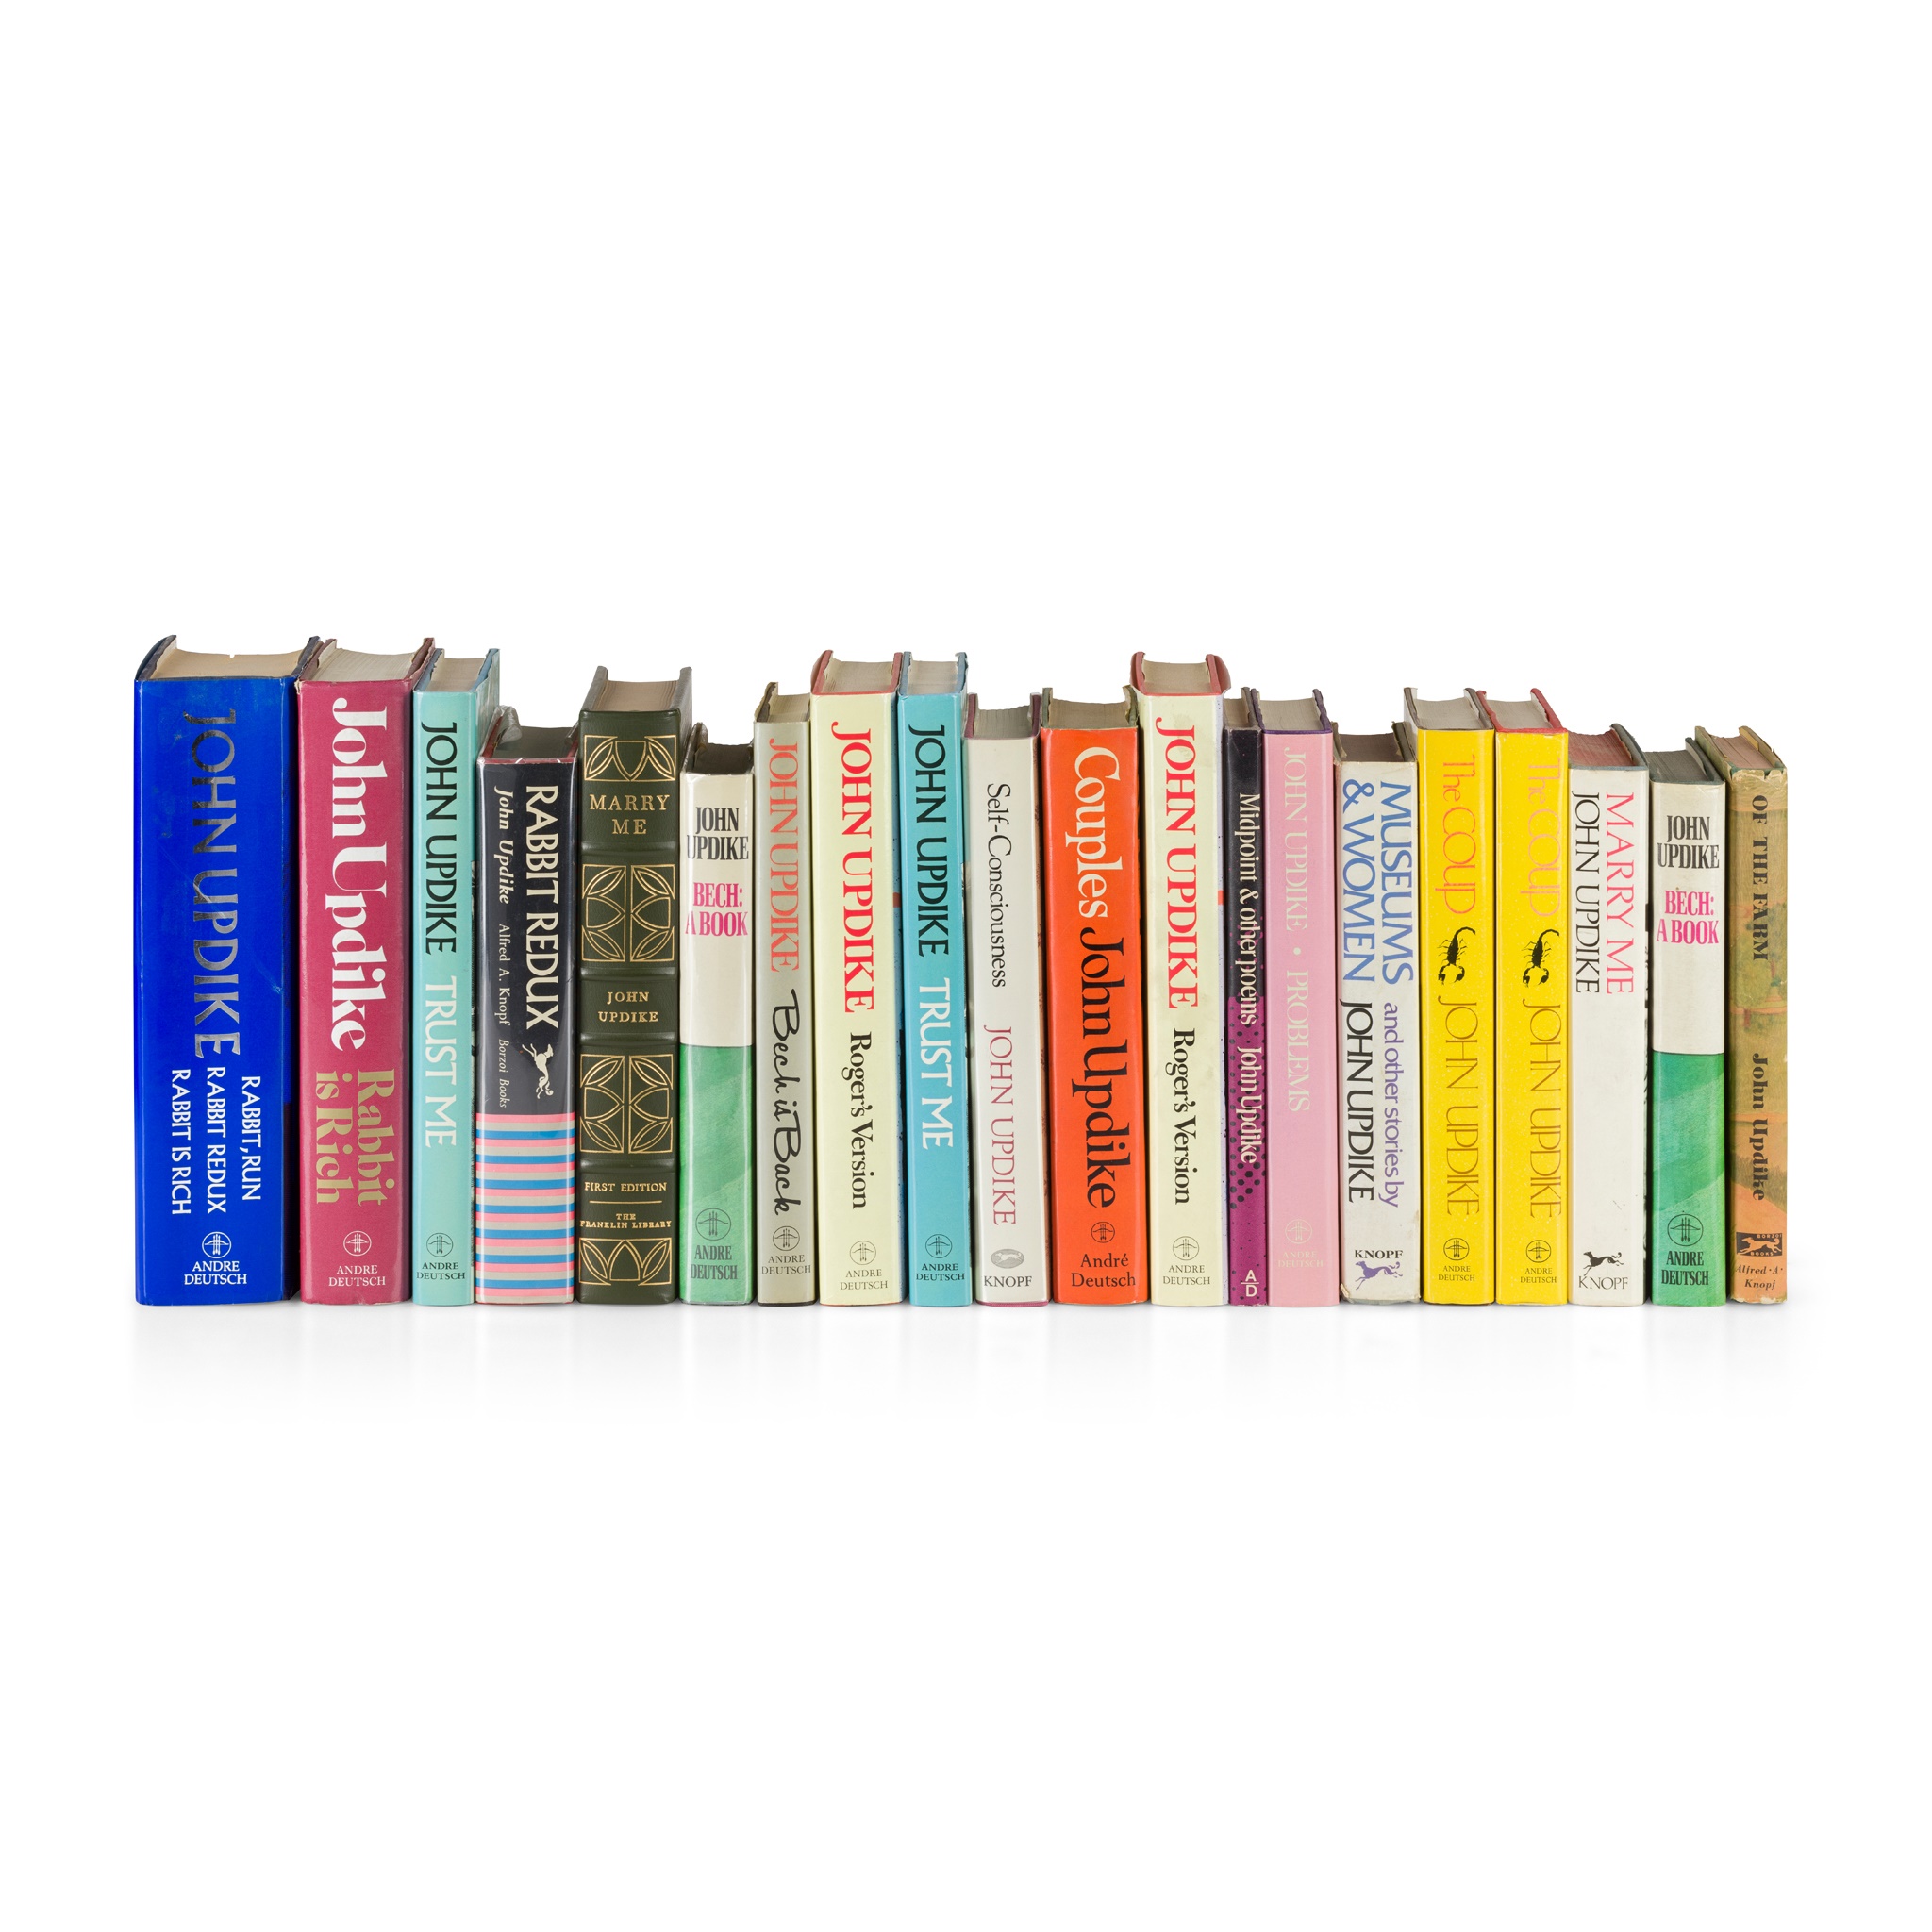 Updike, John 20 works, including 19 US and UK first editions